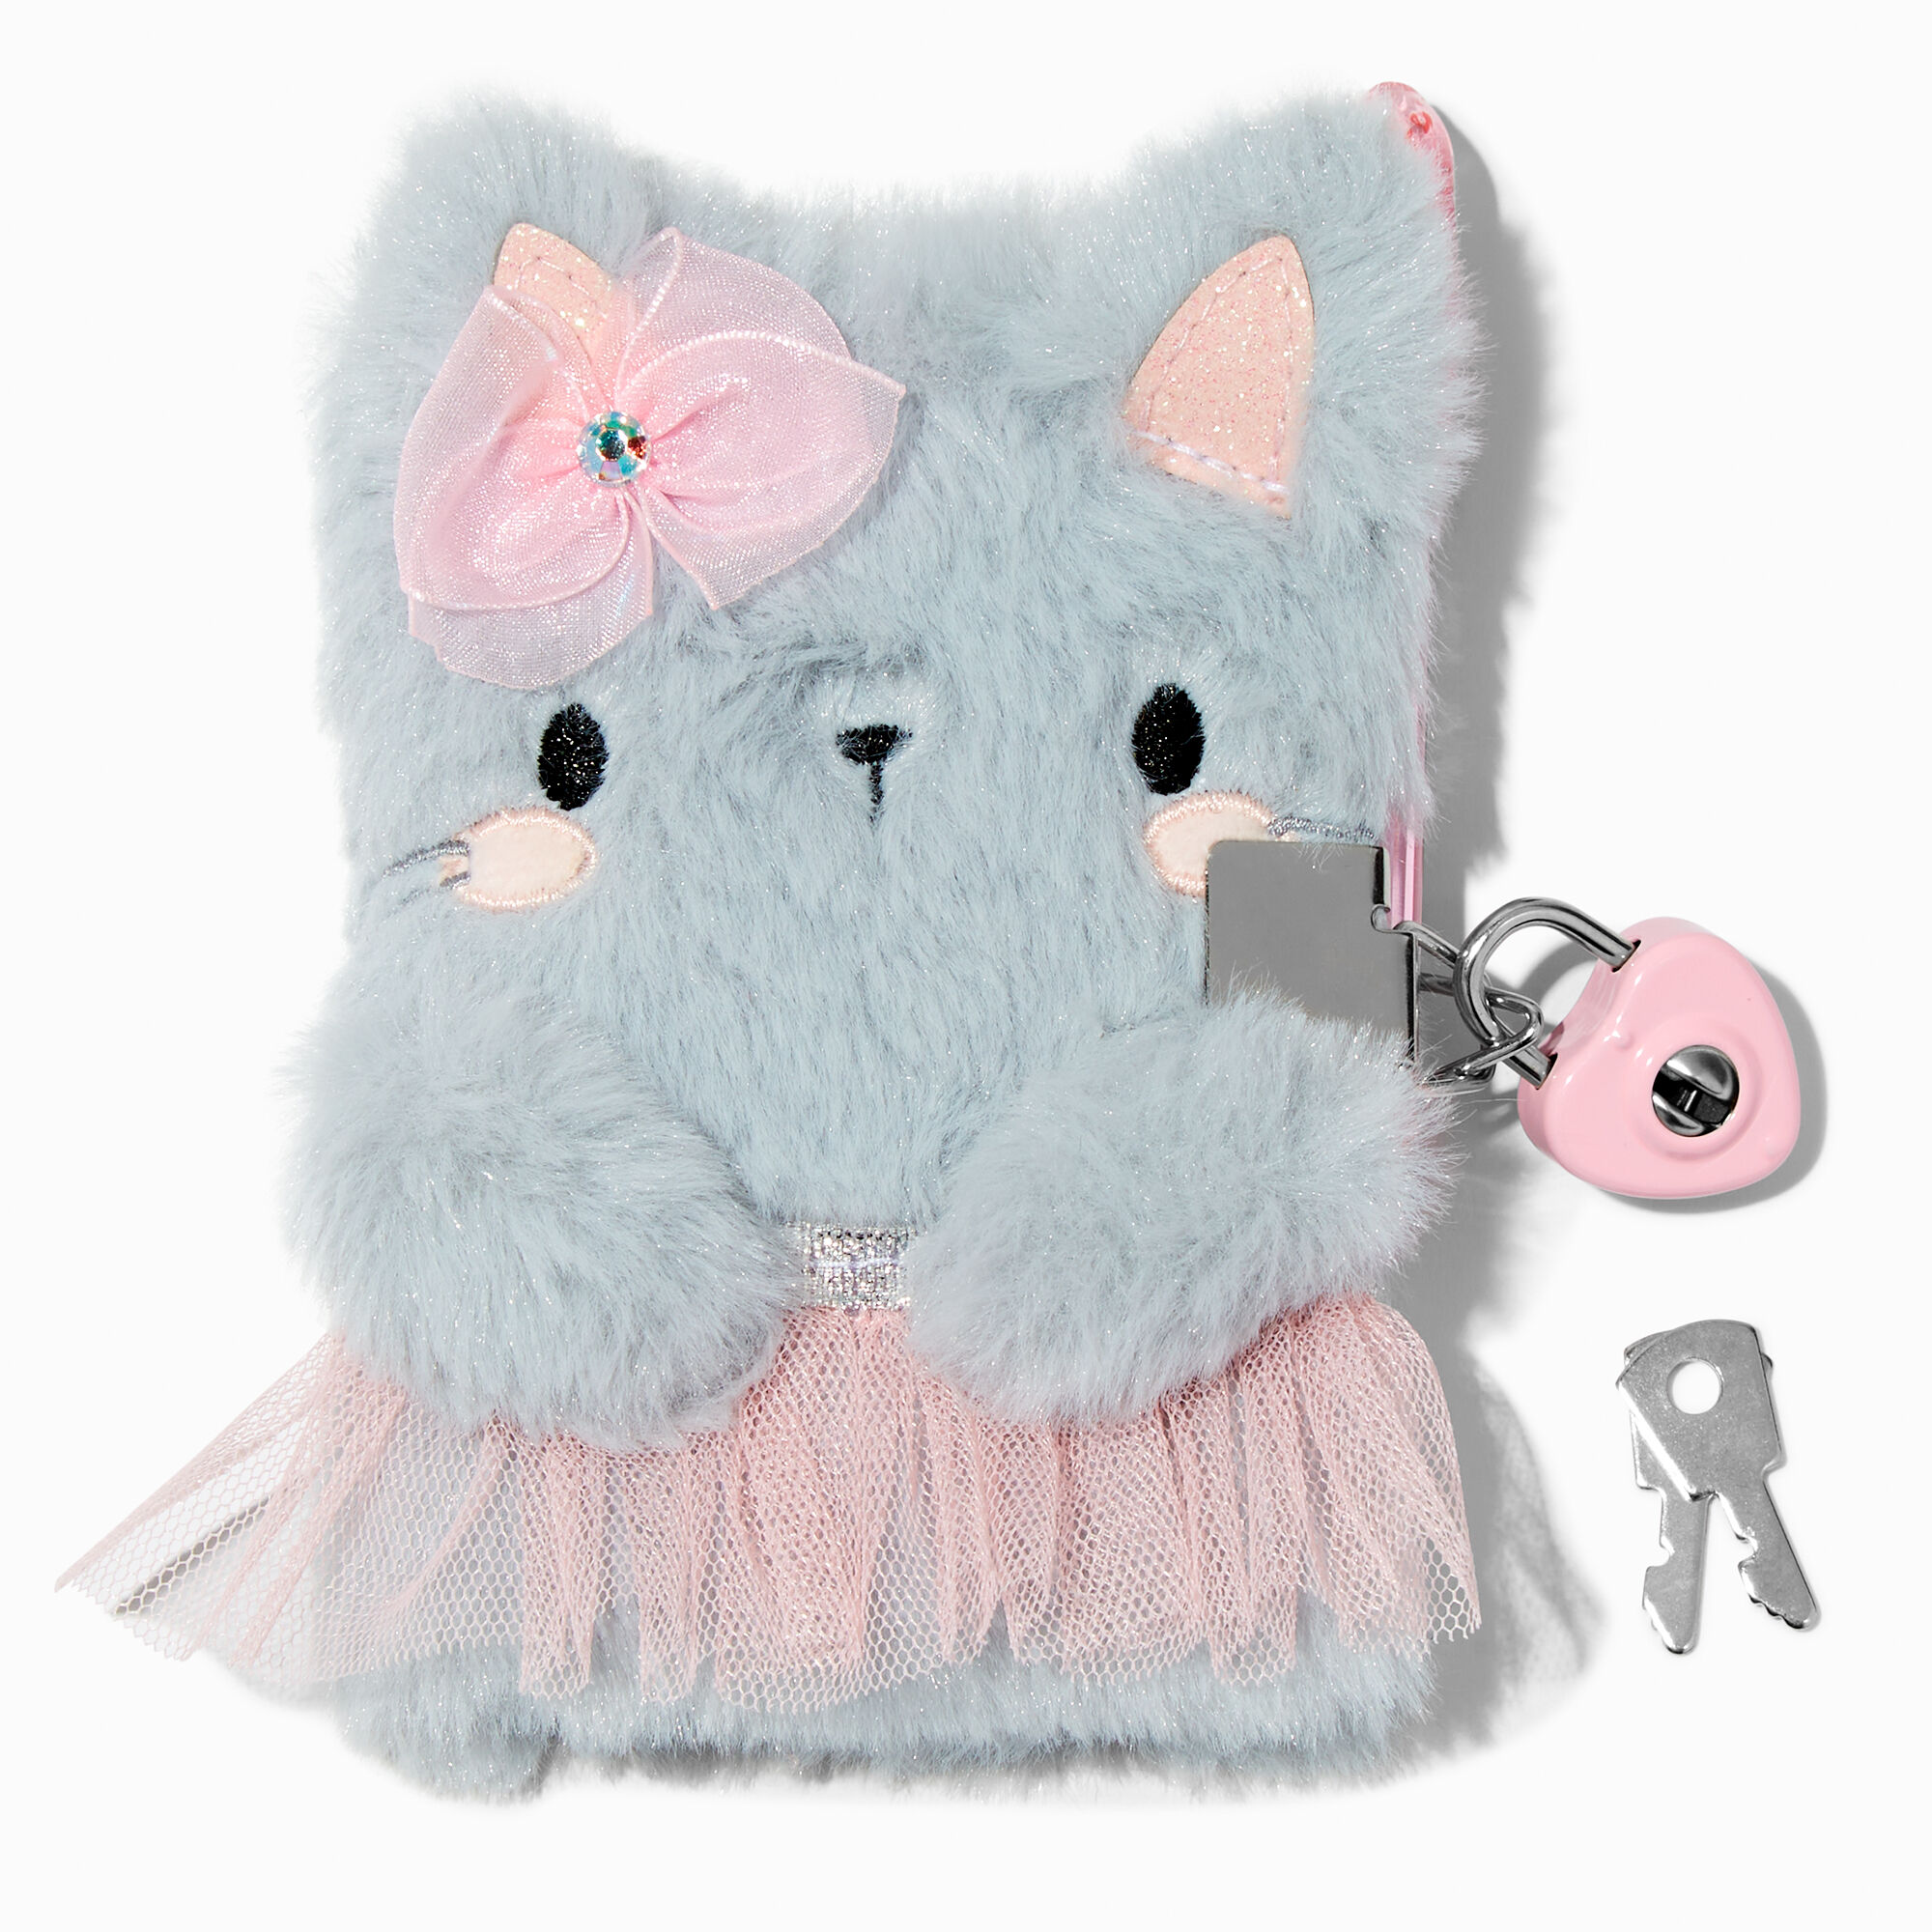 View Claires Club Ballerina Cat Plush Lock Diary information